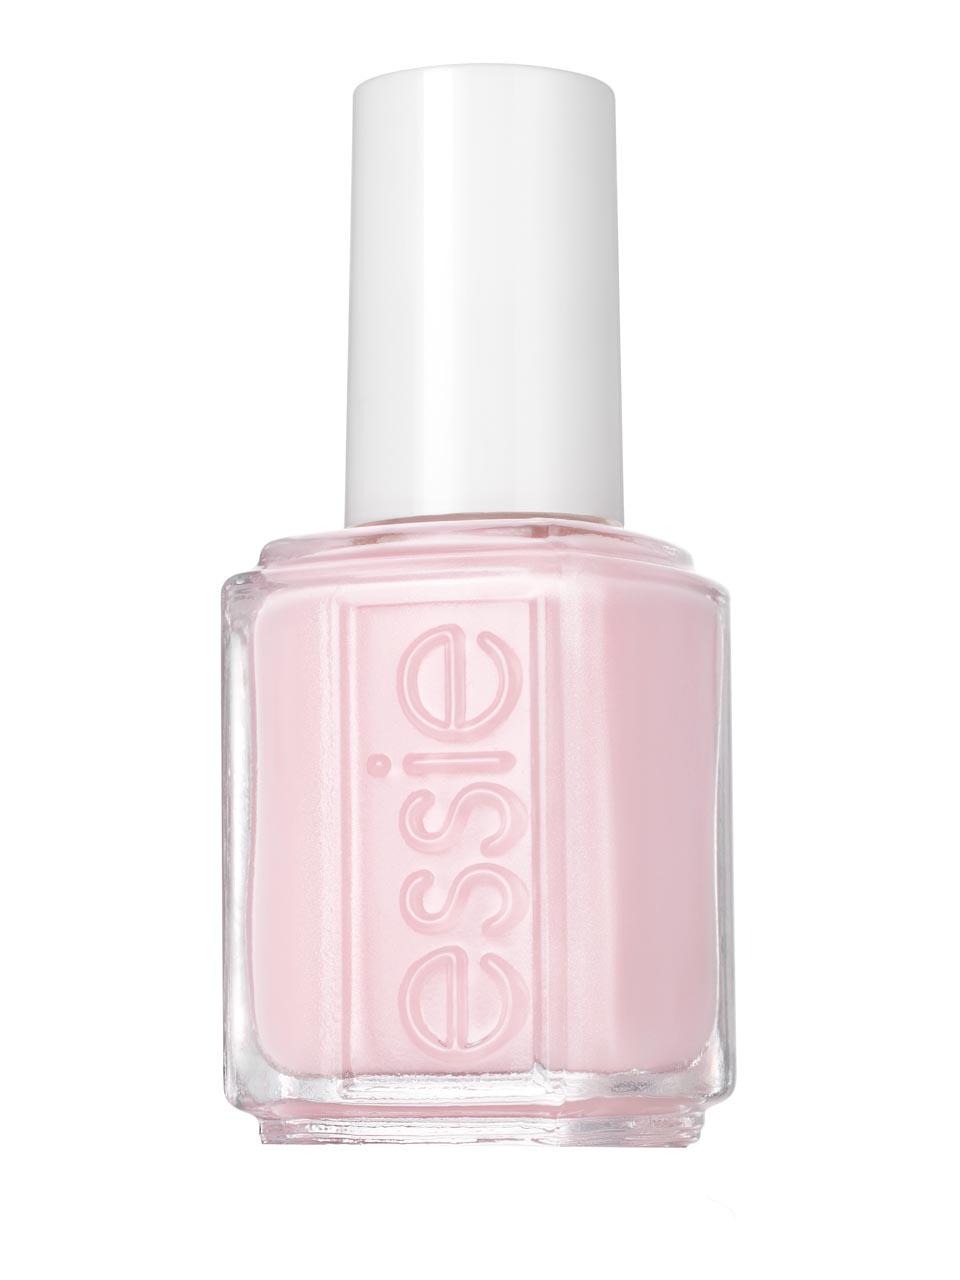 Love you to Essie Color | 13,5 N° Frankfurt Treat 3 Shopping Airport sheers Nail Online ml Polish &